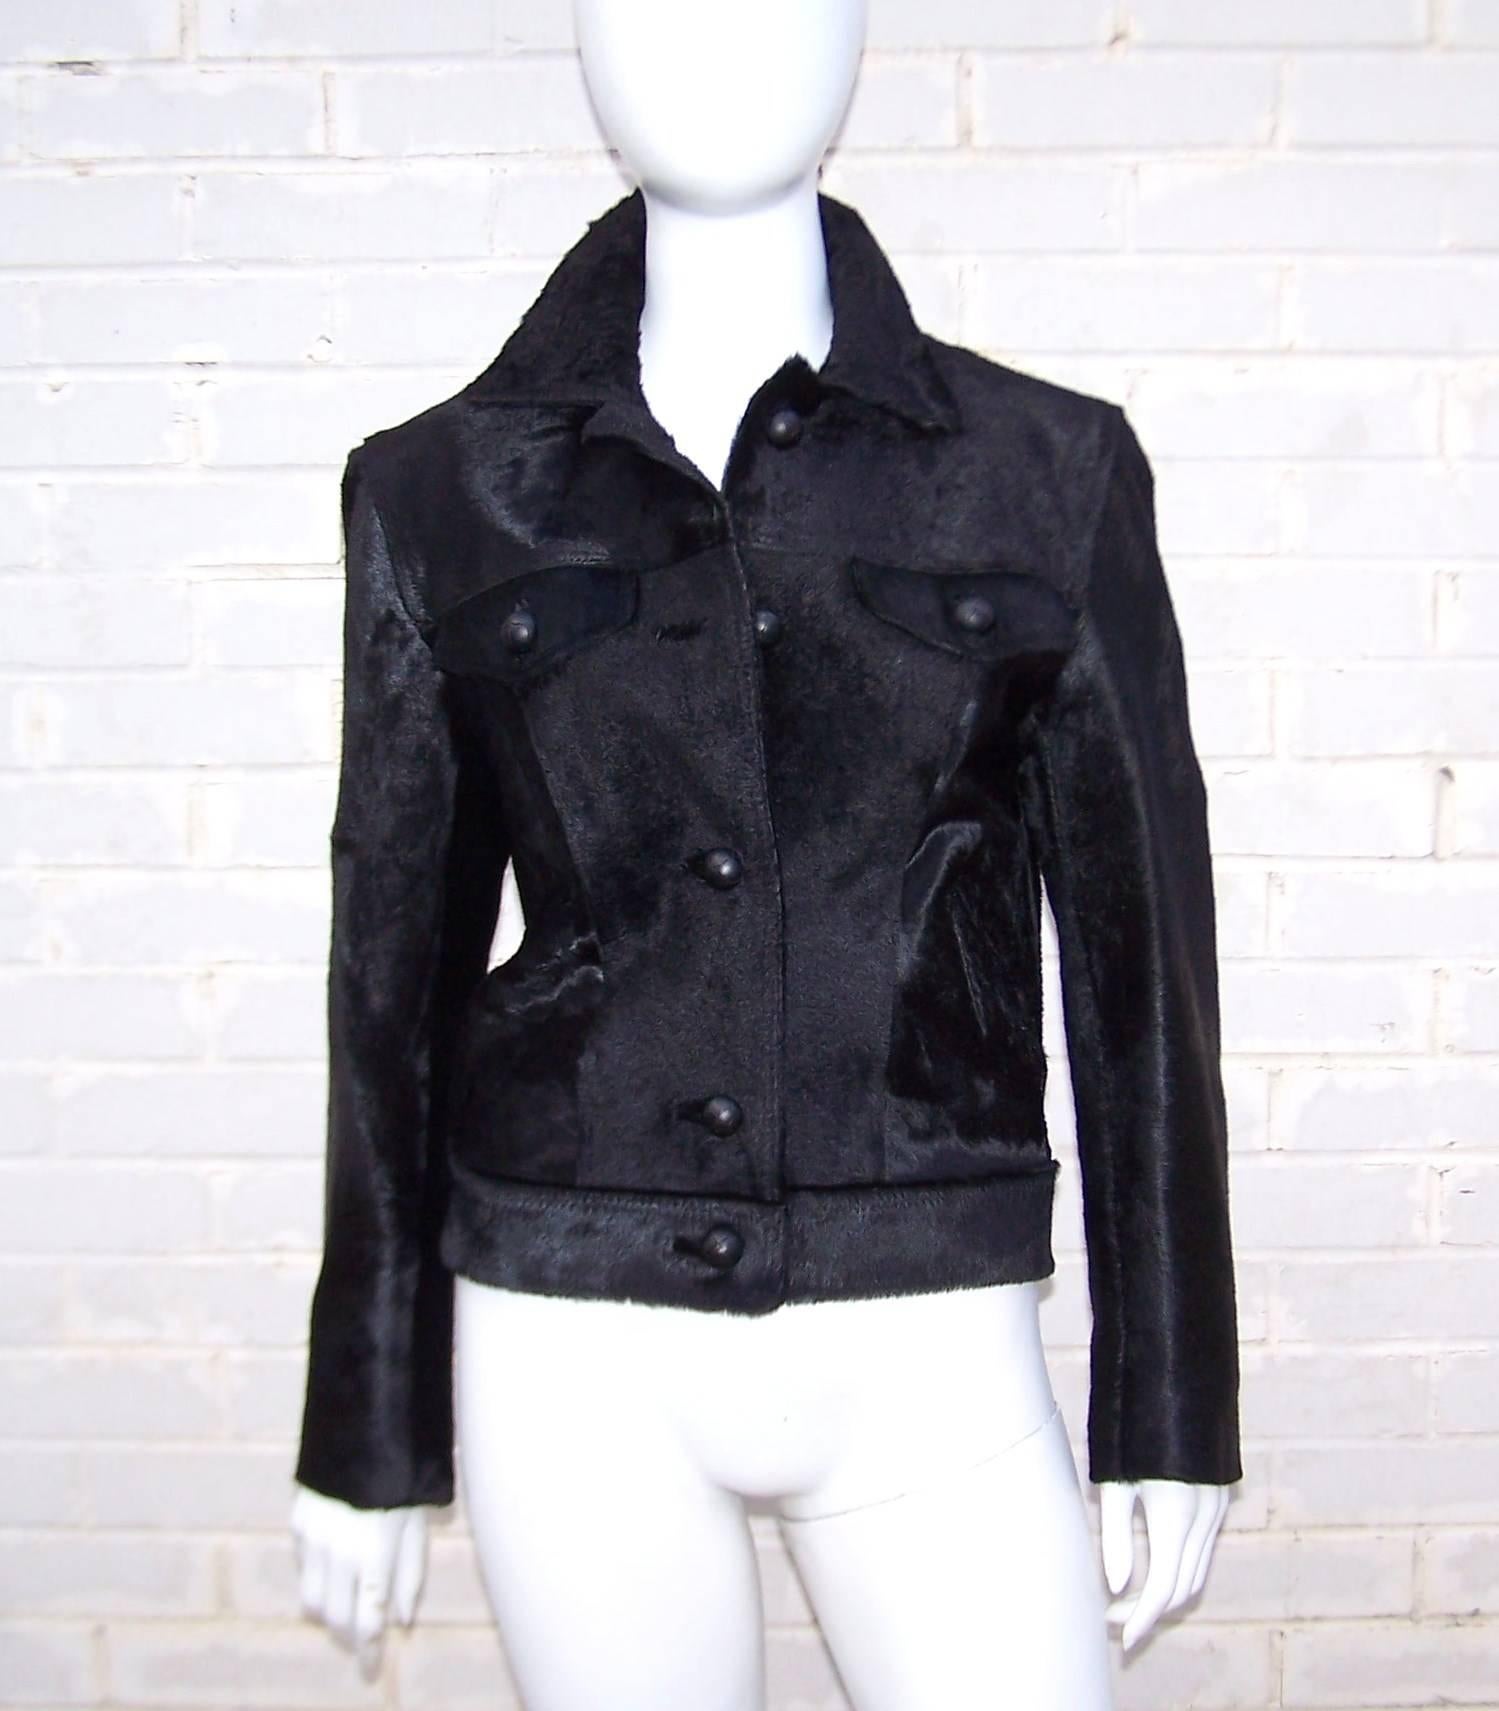 Be a cool kid in this Gianni Versace black pony hide jacket with all the old school style details of a denim jacket.  It buttons at the front with built in waistband, side pockets, button flap breast pockets and a collar that is just begging to be